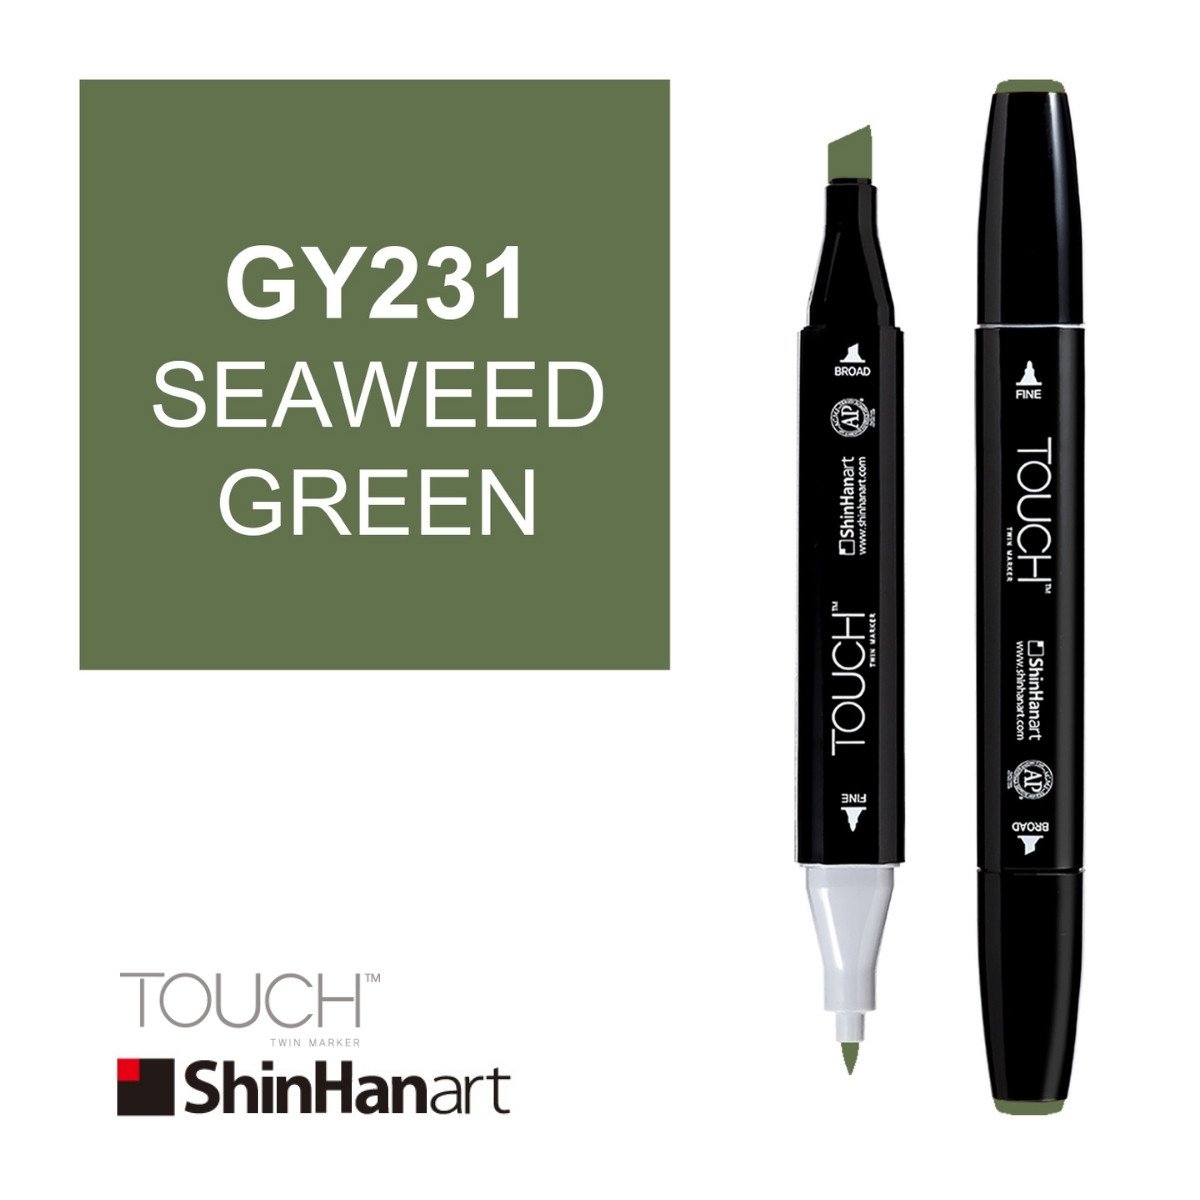 ShinHan Art Touch Twin Marker GY231 Seaweed Green